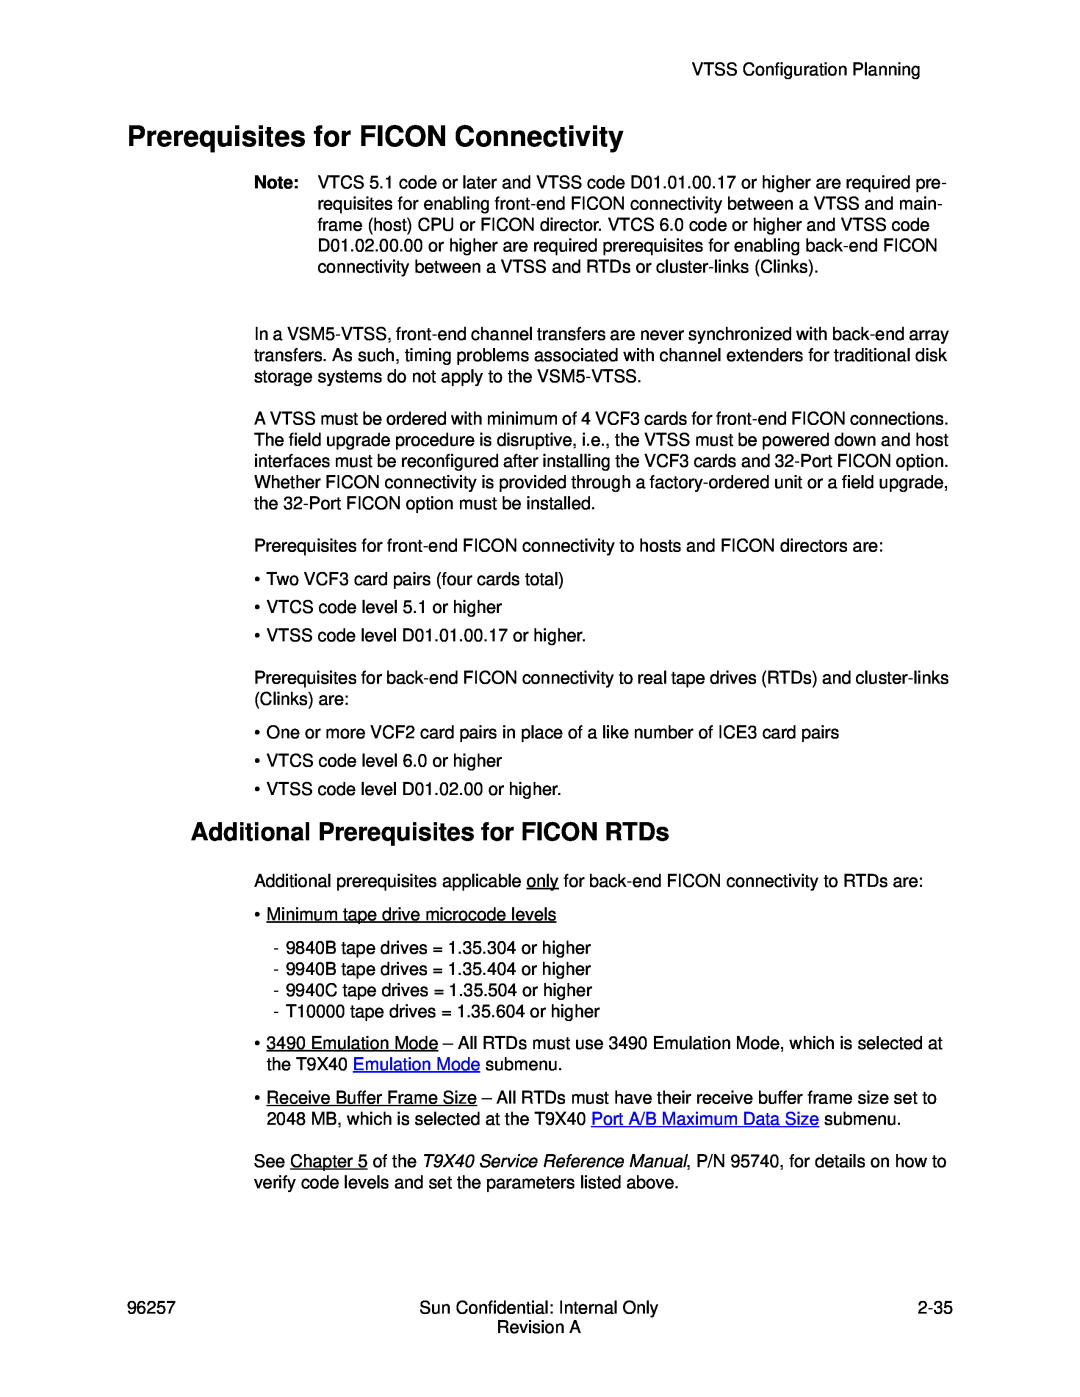 Sun Microsystems 96257 manual Prerequisites for FICON Connectivity, Additional Prerequisites for FICON RTDs 